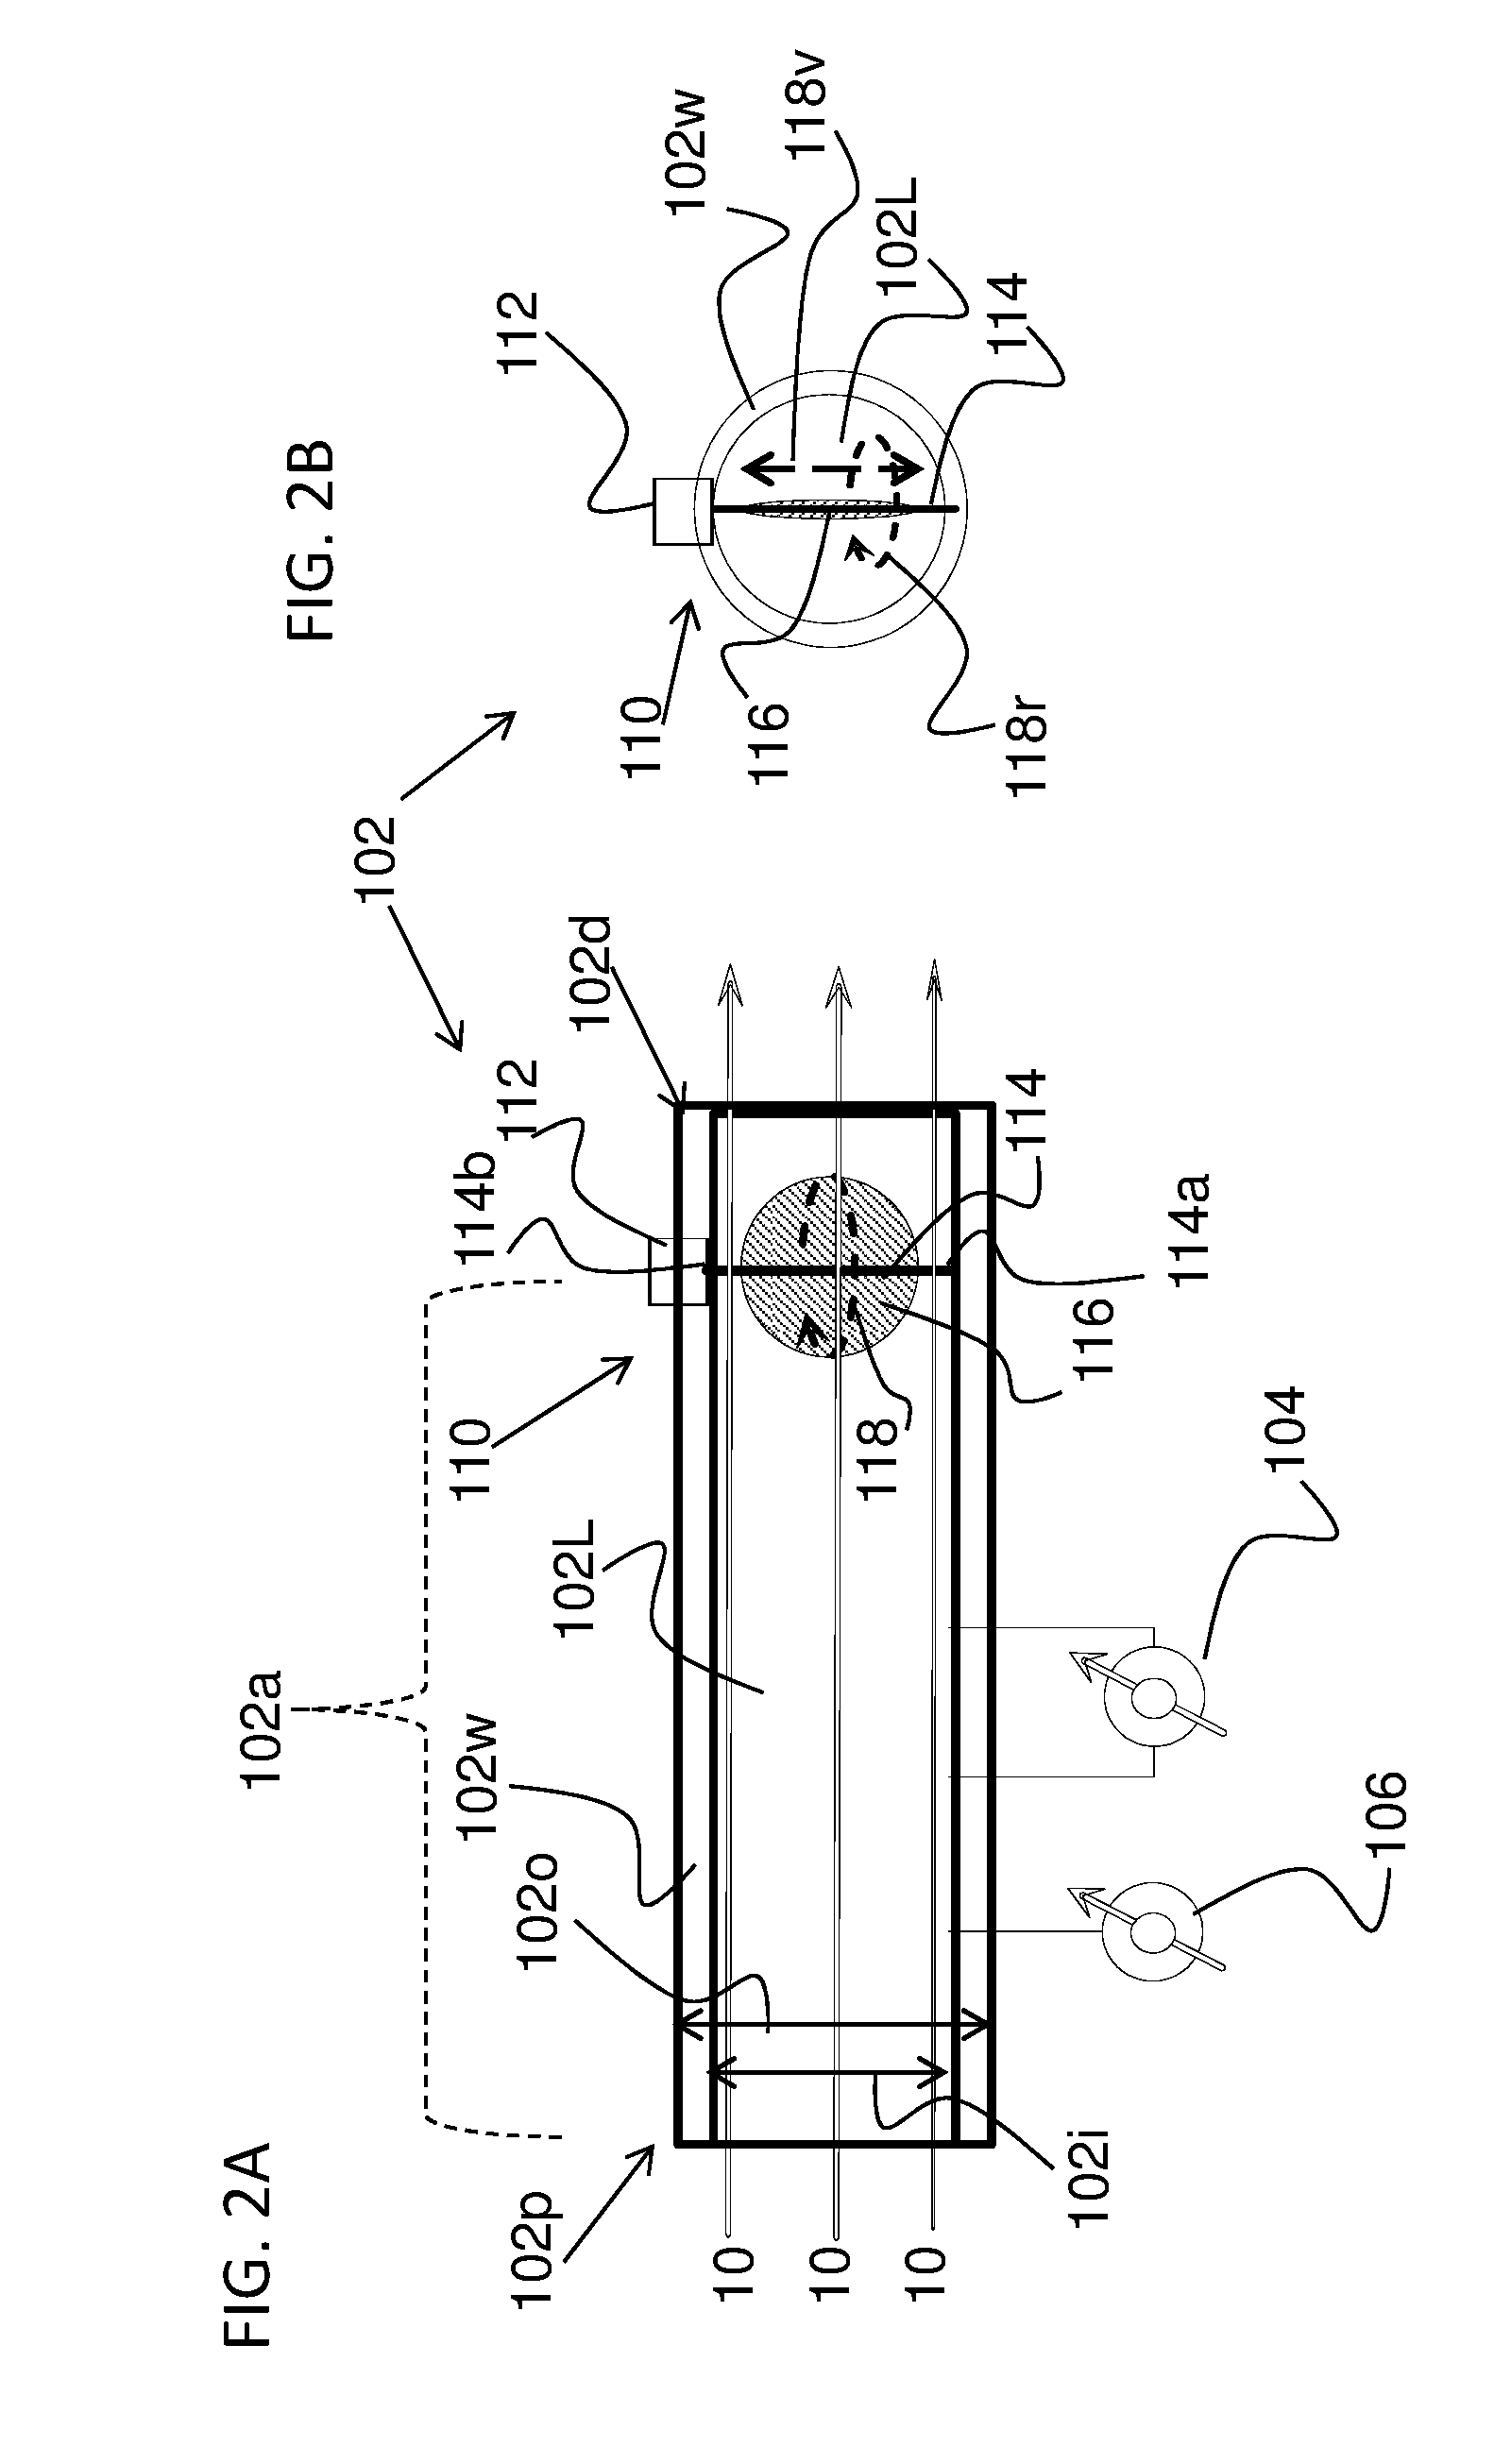 Spirometer system and method for determining lung functional residual capacity (FRC) with a non-occluding shutter